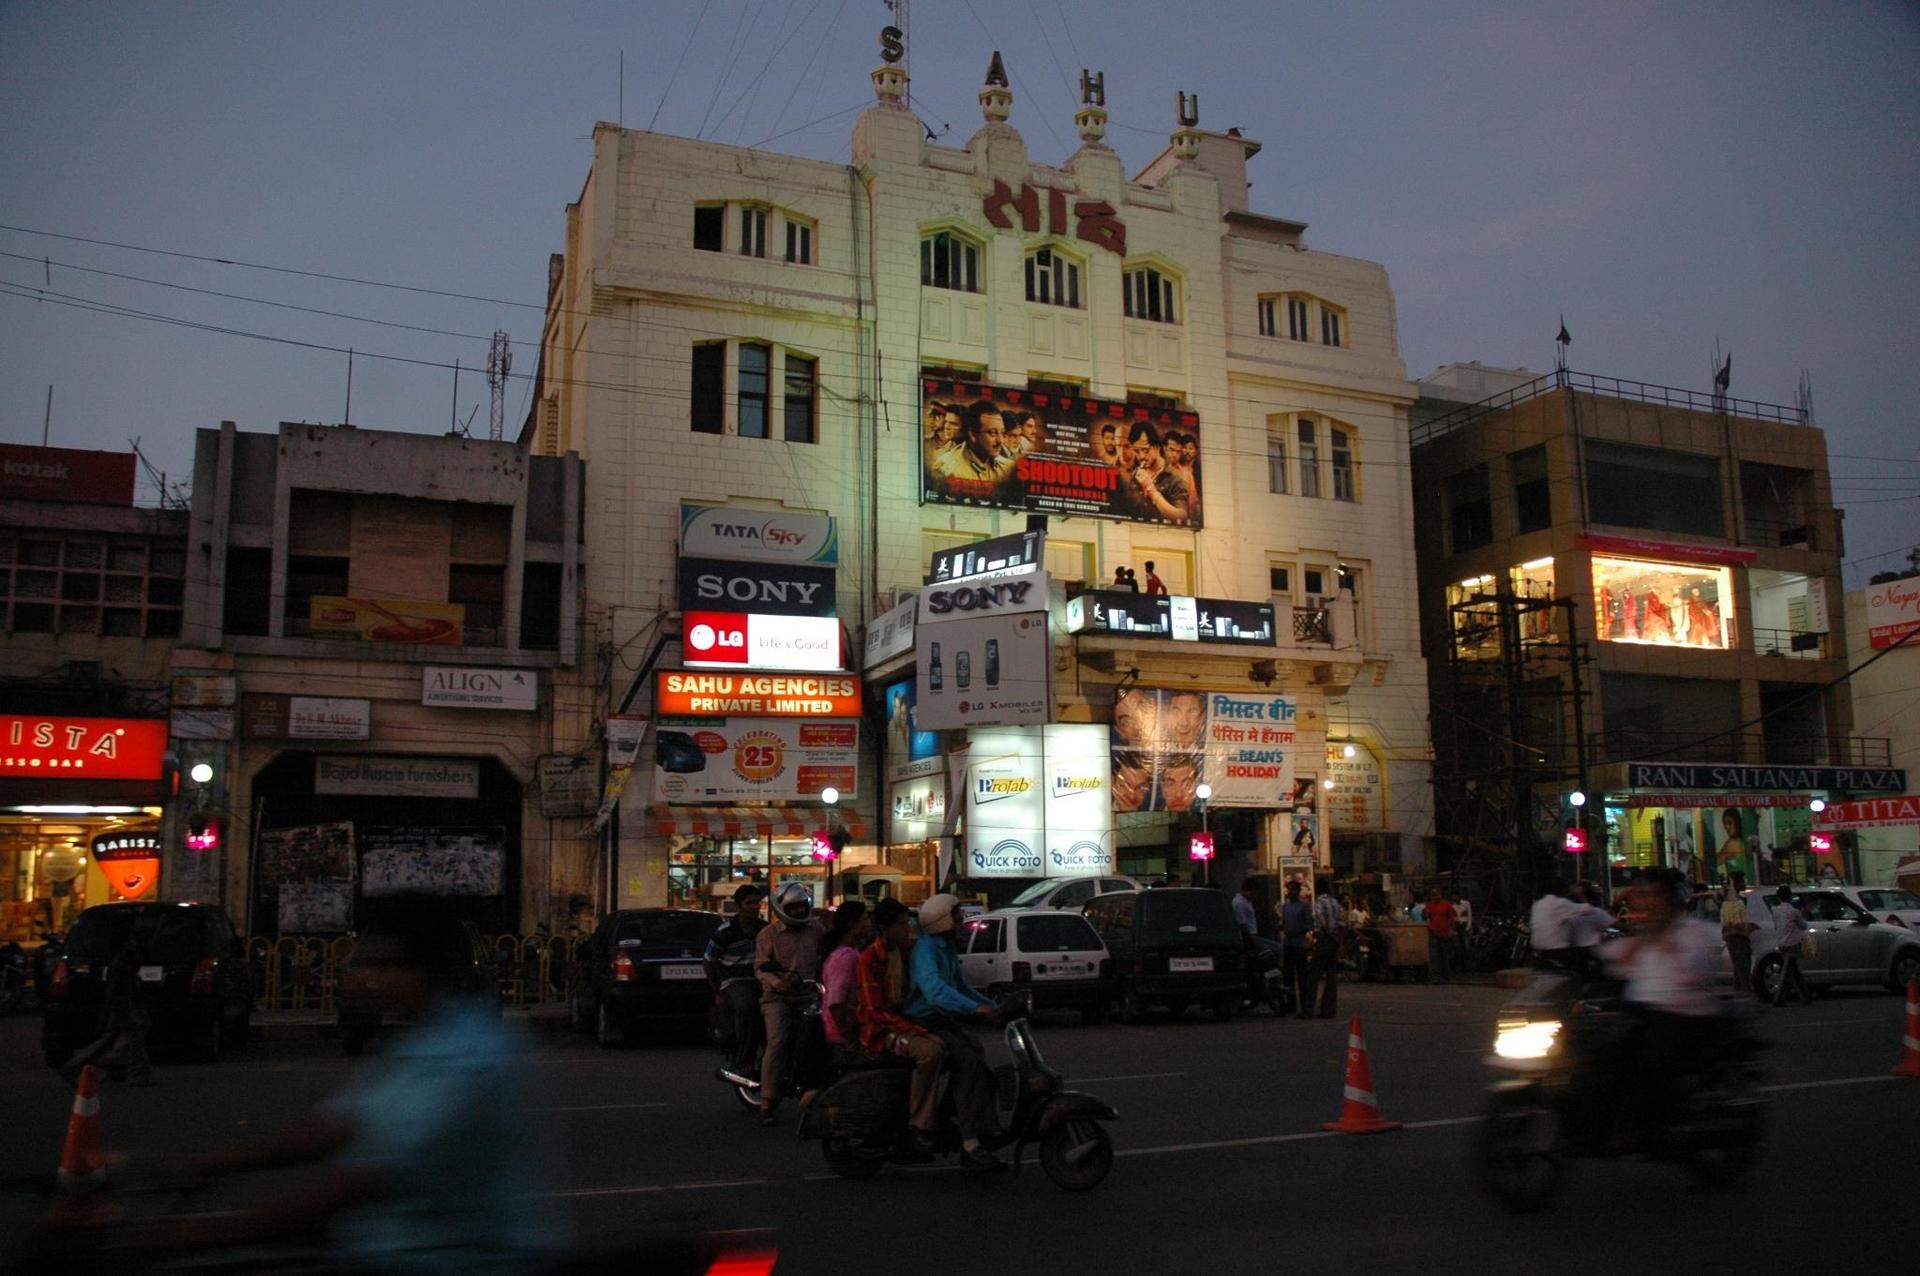 This is Sahu Cinema Hall, in the center of my hometown, Lucknow, India. I watched hundreds of movies there when I was kid, and it brings back lots of memories for me.